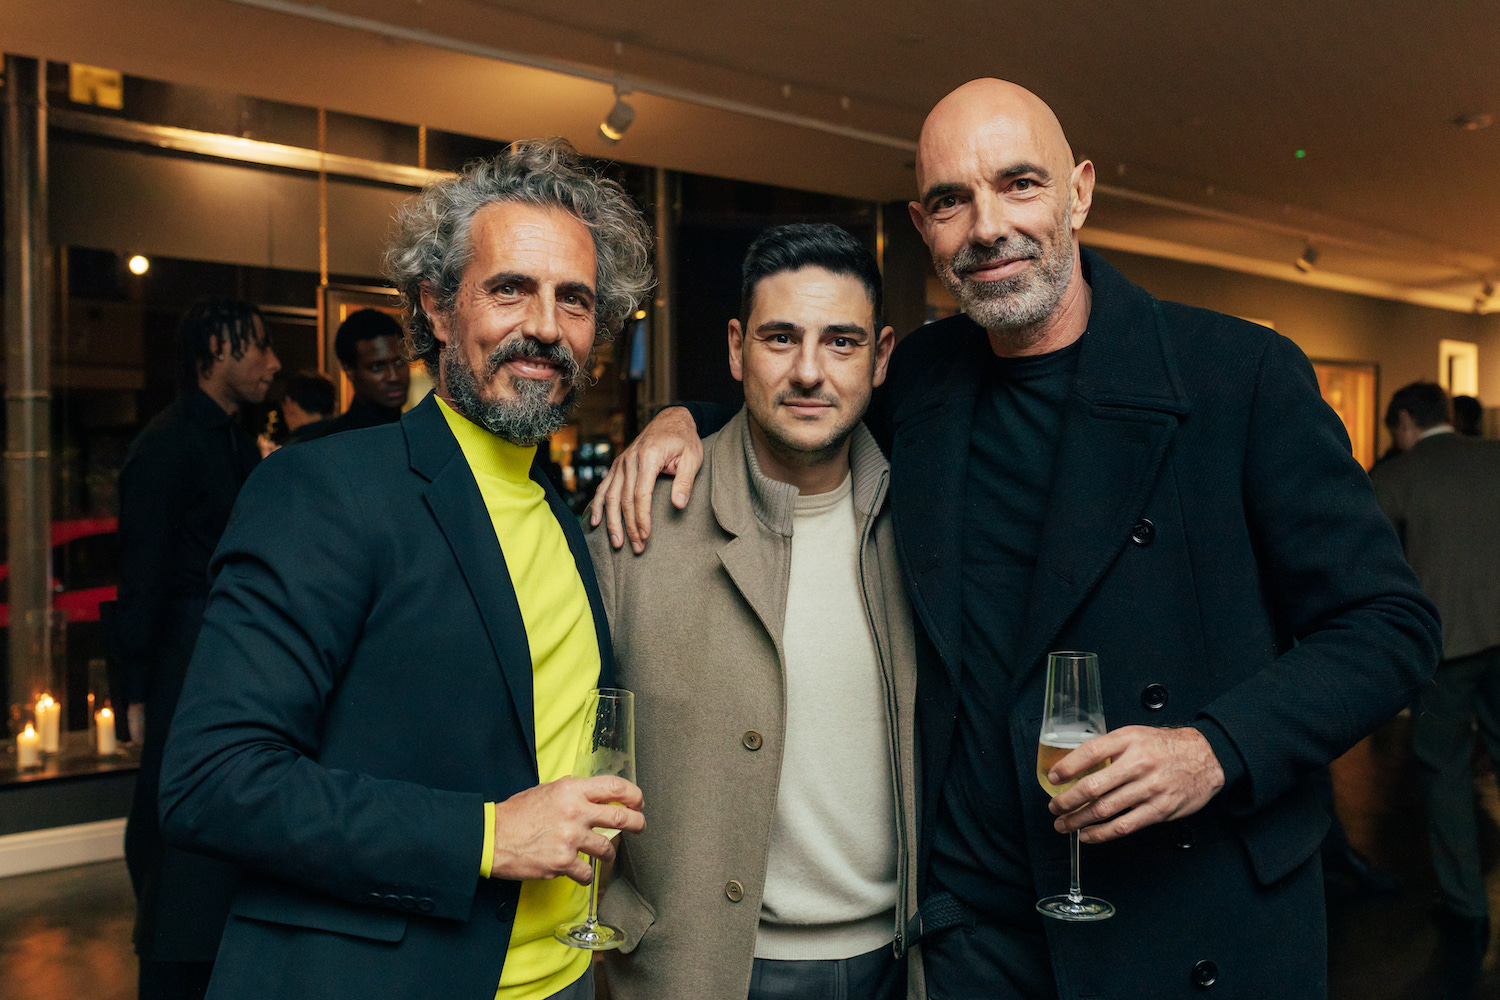 The Miaz Brothers at the 'Don't Look Now' preview party with (centre) Mario Zonias, sales director and co-founder of Maddox Gallery